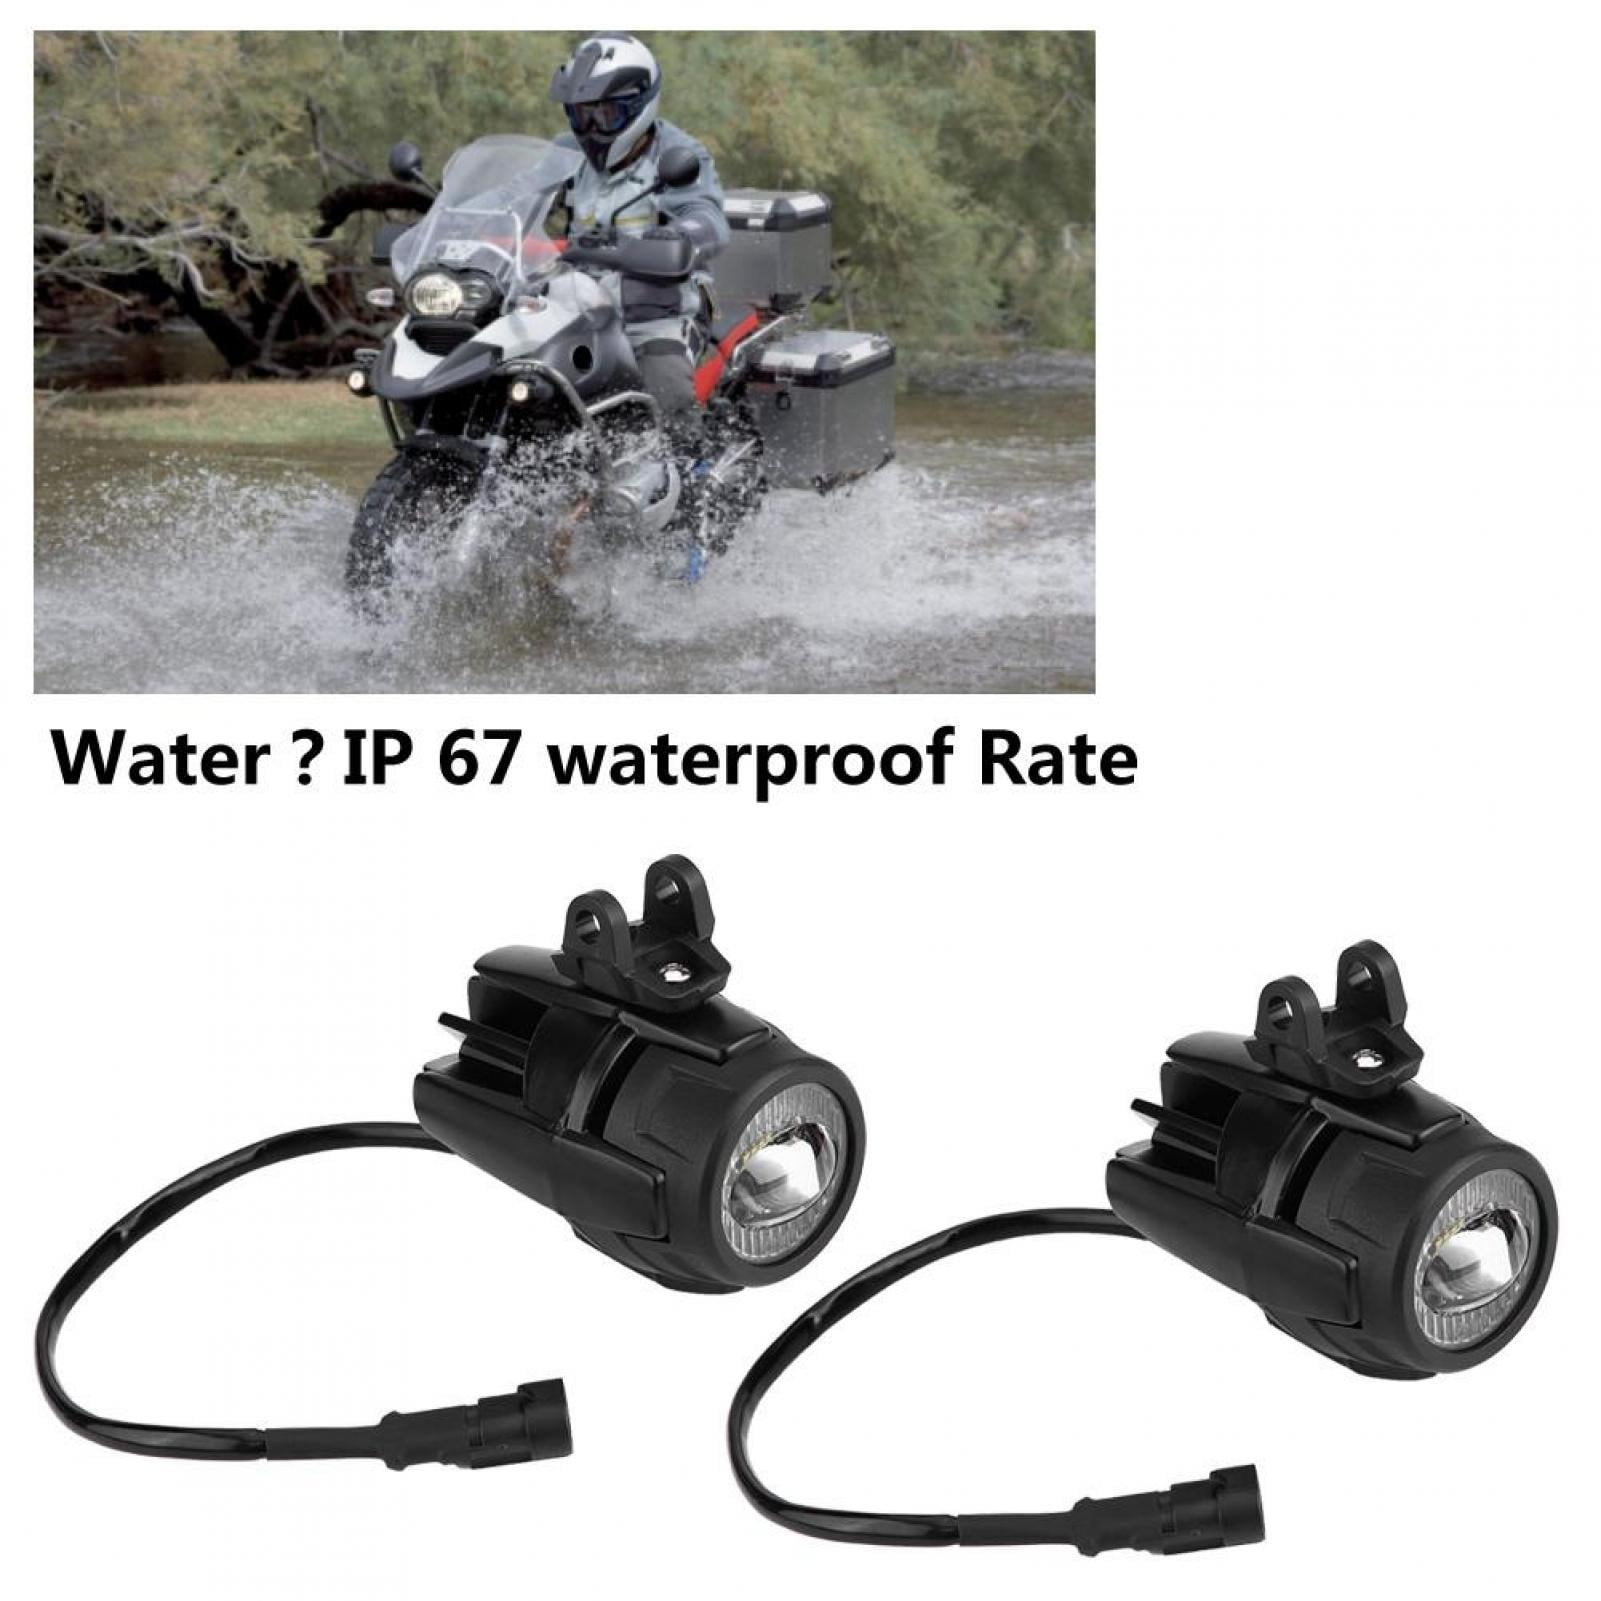 Akozon Motorcycle Fog Light 2Pcs Motorbike LED Front Headlight with Wiring Harness Bracket for F800GS R1200GS ADV 2014-2017 